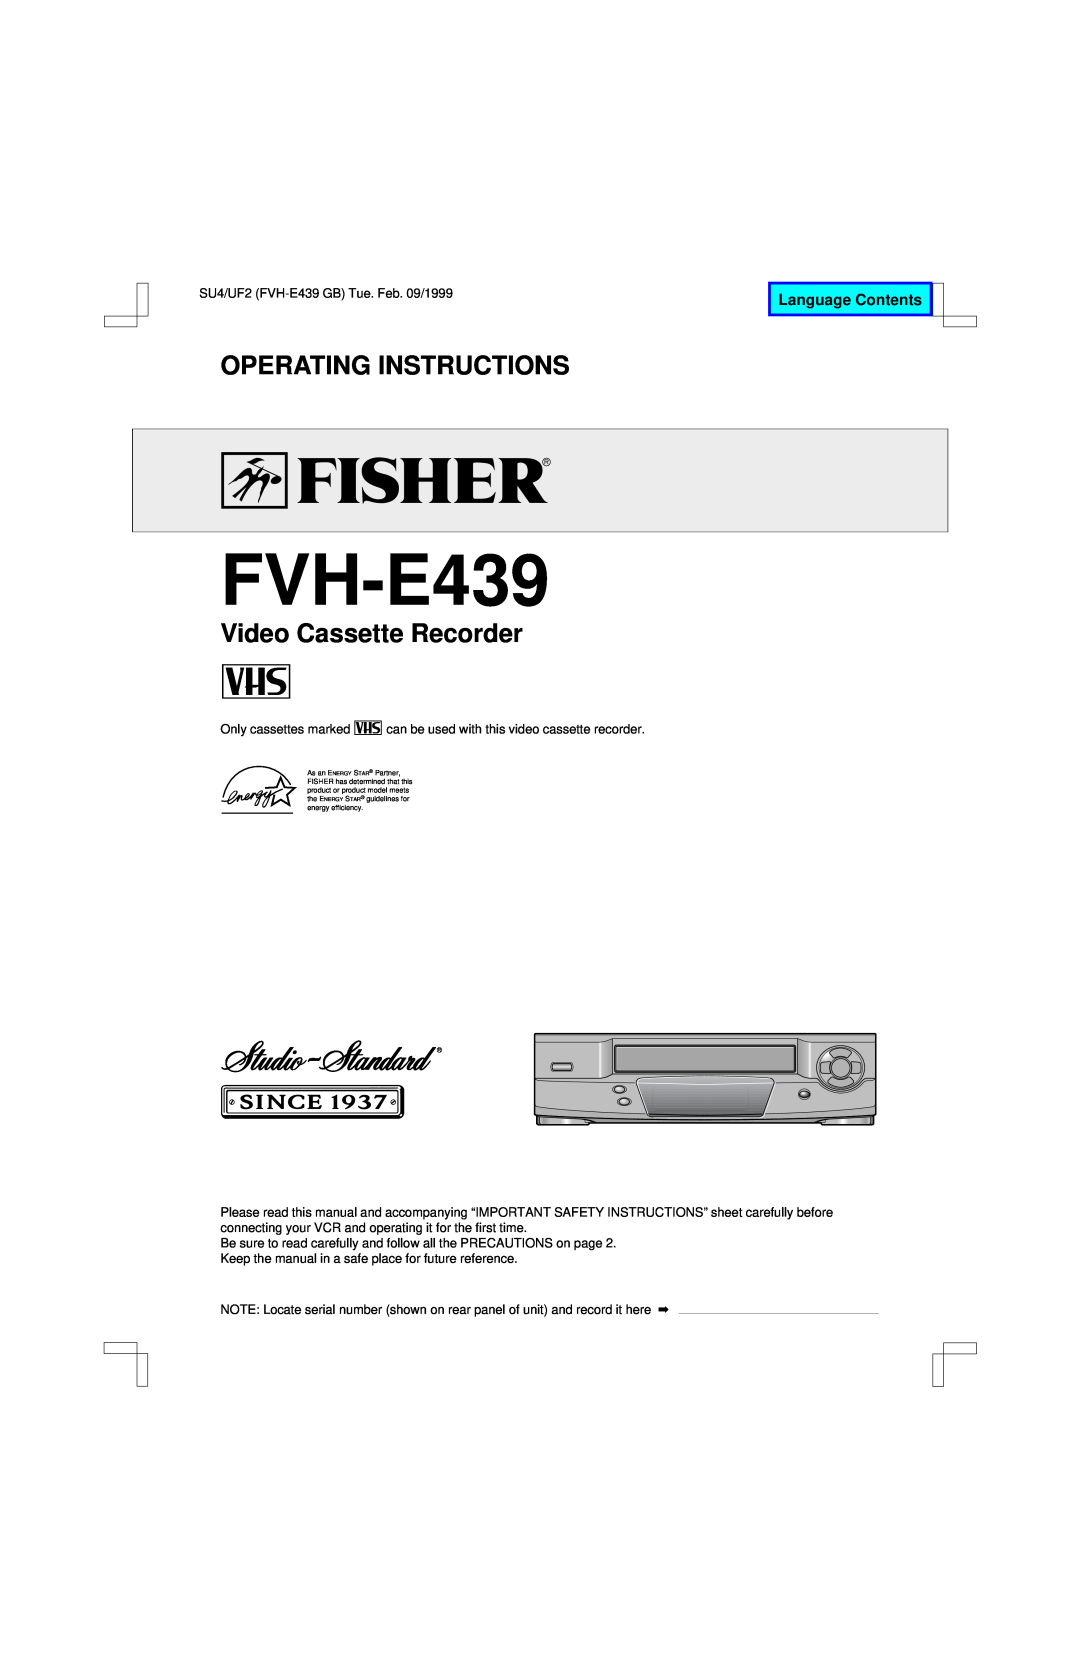 Fisher FVH-E439 operating instructions Operating Instructions, Video Cassette Recorder, Language Contents 